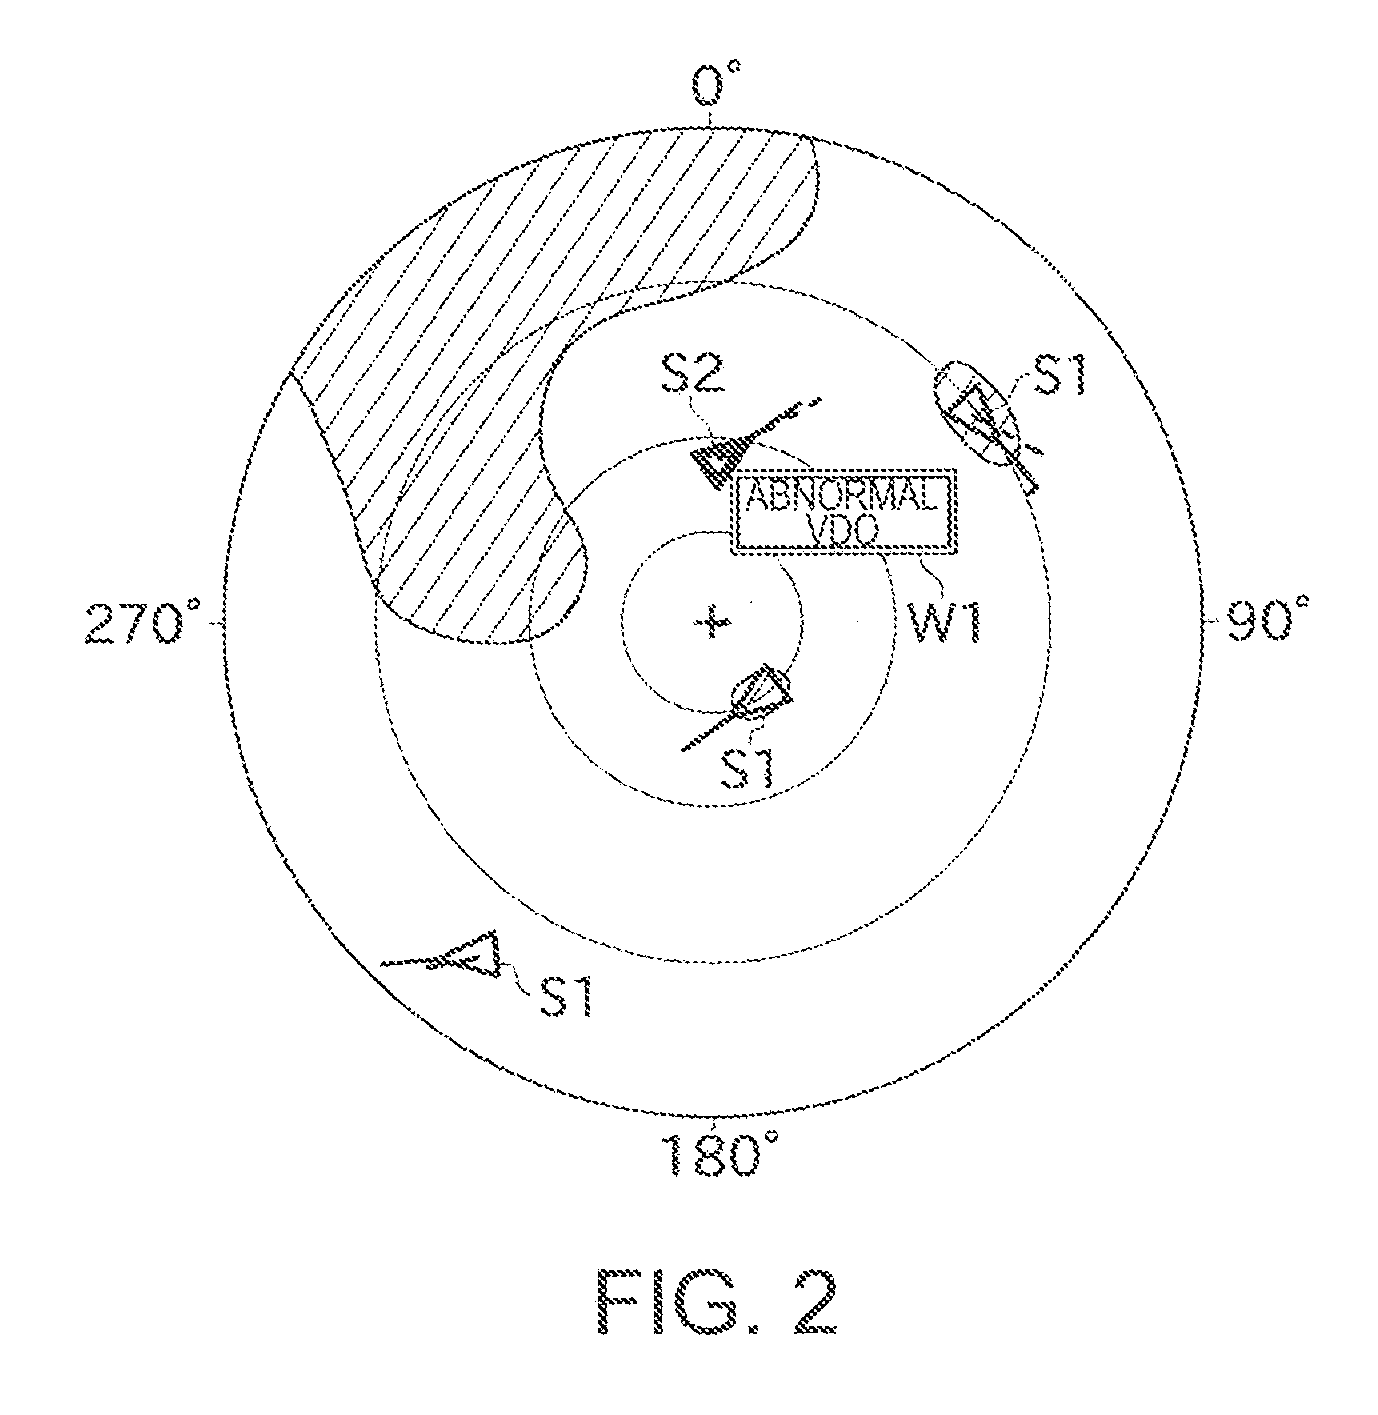 Device and method for displaying ship perimeter information